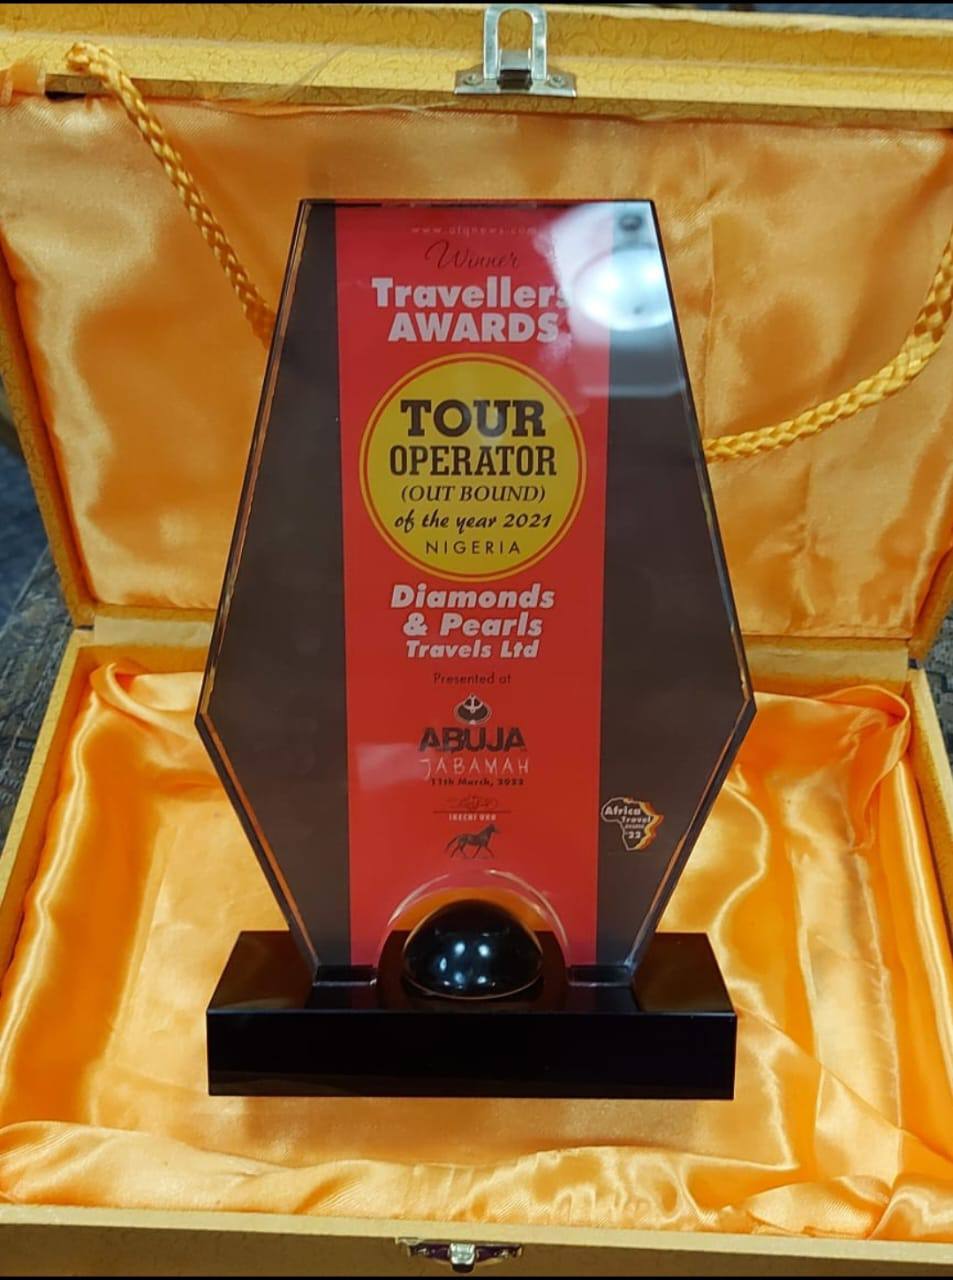 Travellers Magazine Awards Diamond and Pearls Limited as Tour Operators in Nigeria for 2021